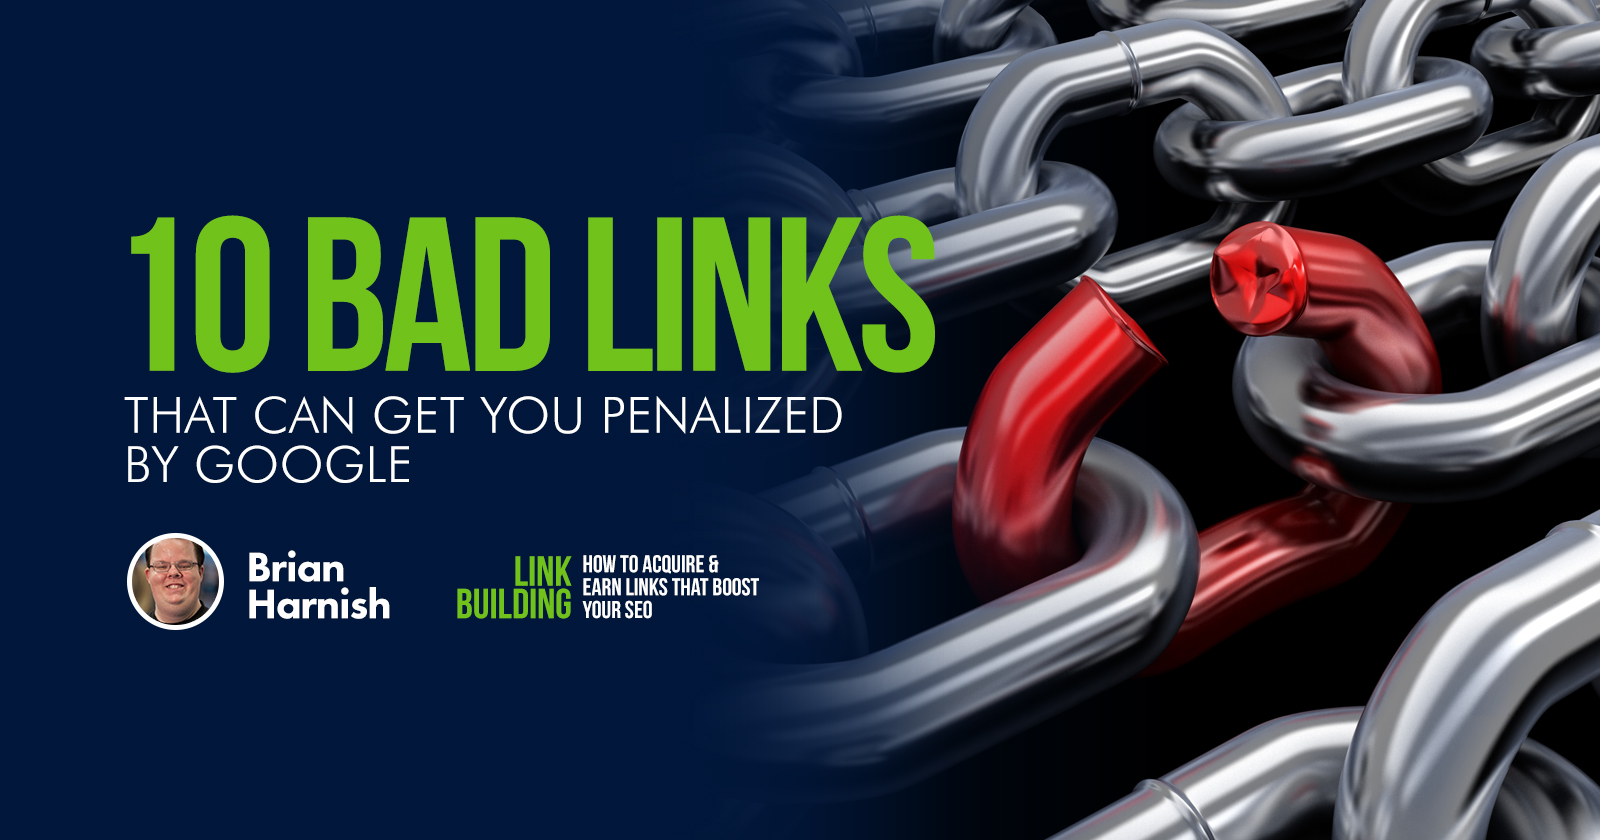 10 Bad Links That Can Get You Penalized by Google via @BrianHarnish